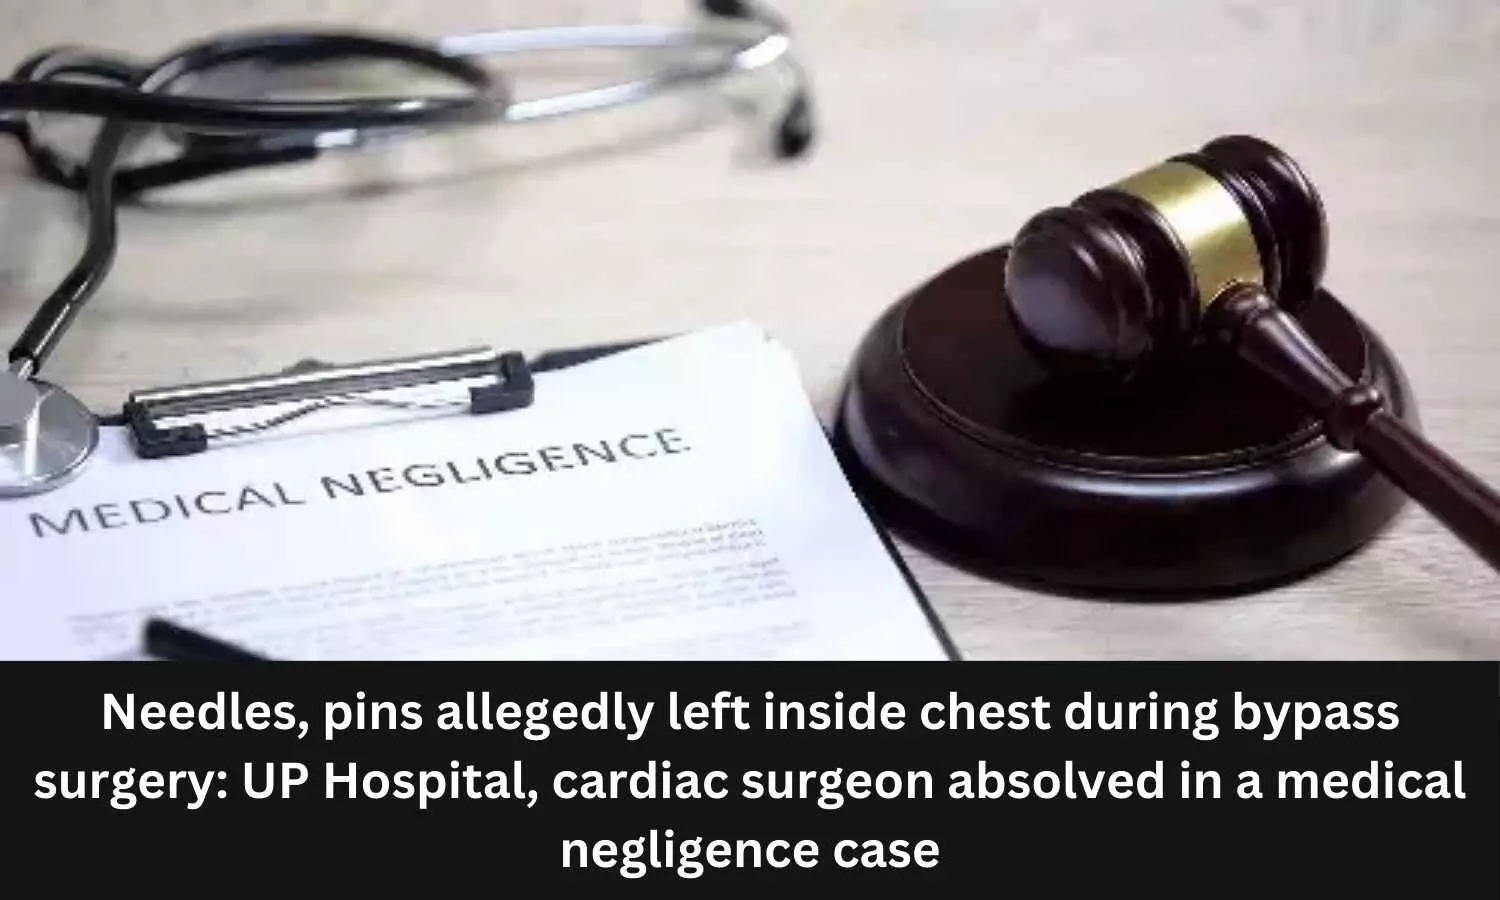 NCDRC absolves UP Hospital, Cardiac Surgeon in medical negligence case